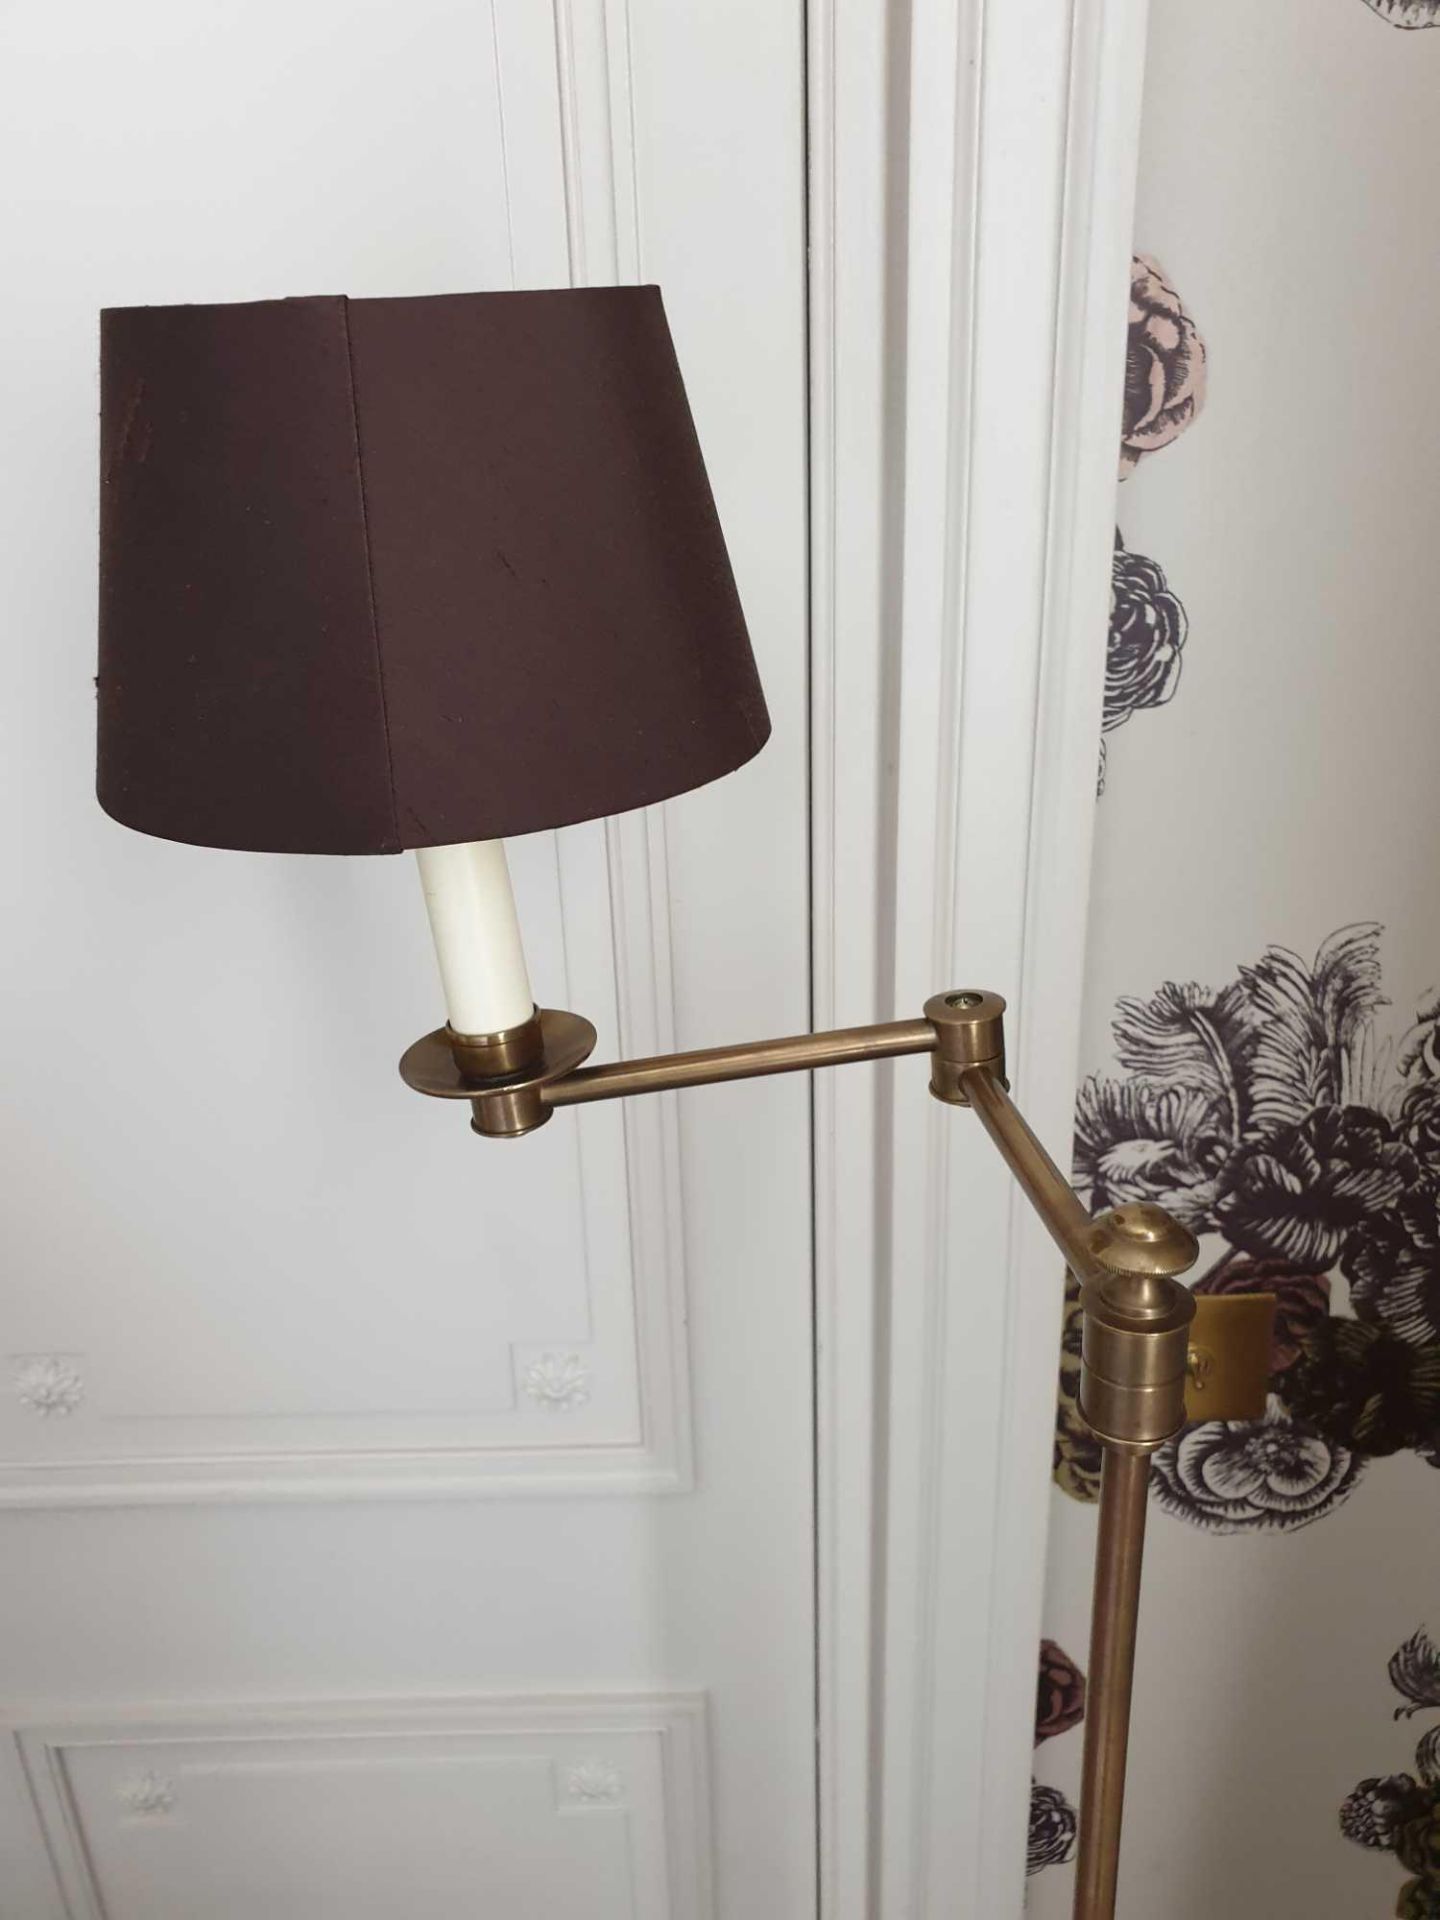 Library Floor Lamp Finished In English Bronze Swing Arm Function With Shade 156cm (Room 712) - Image 2 of 2